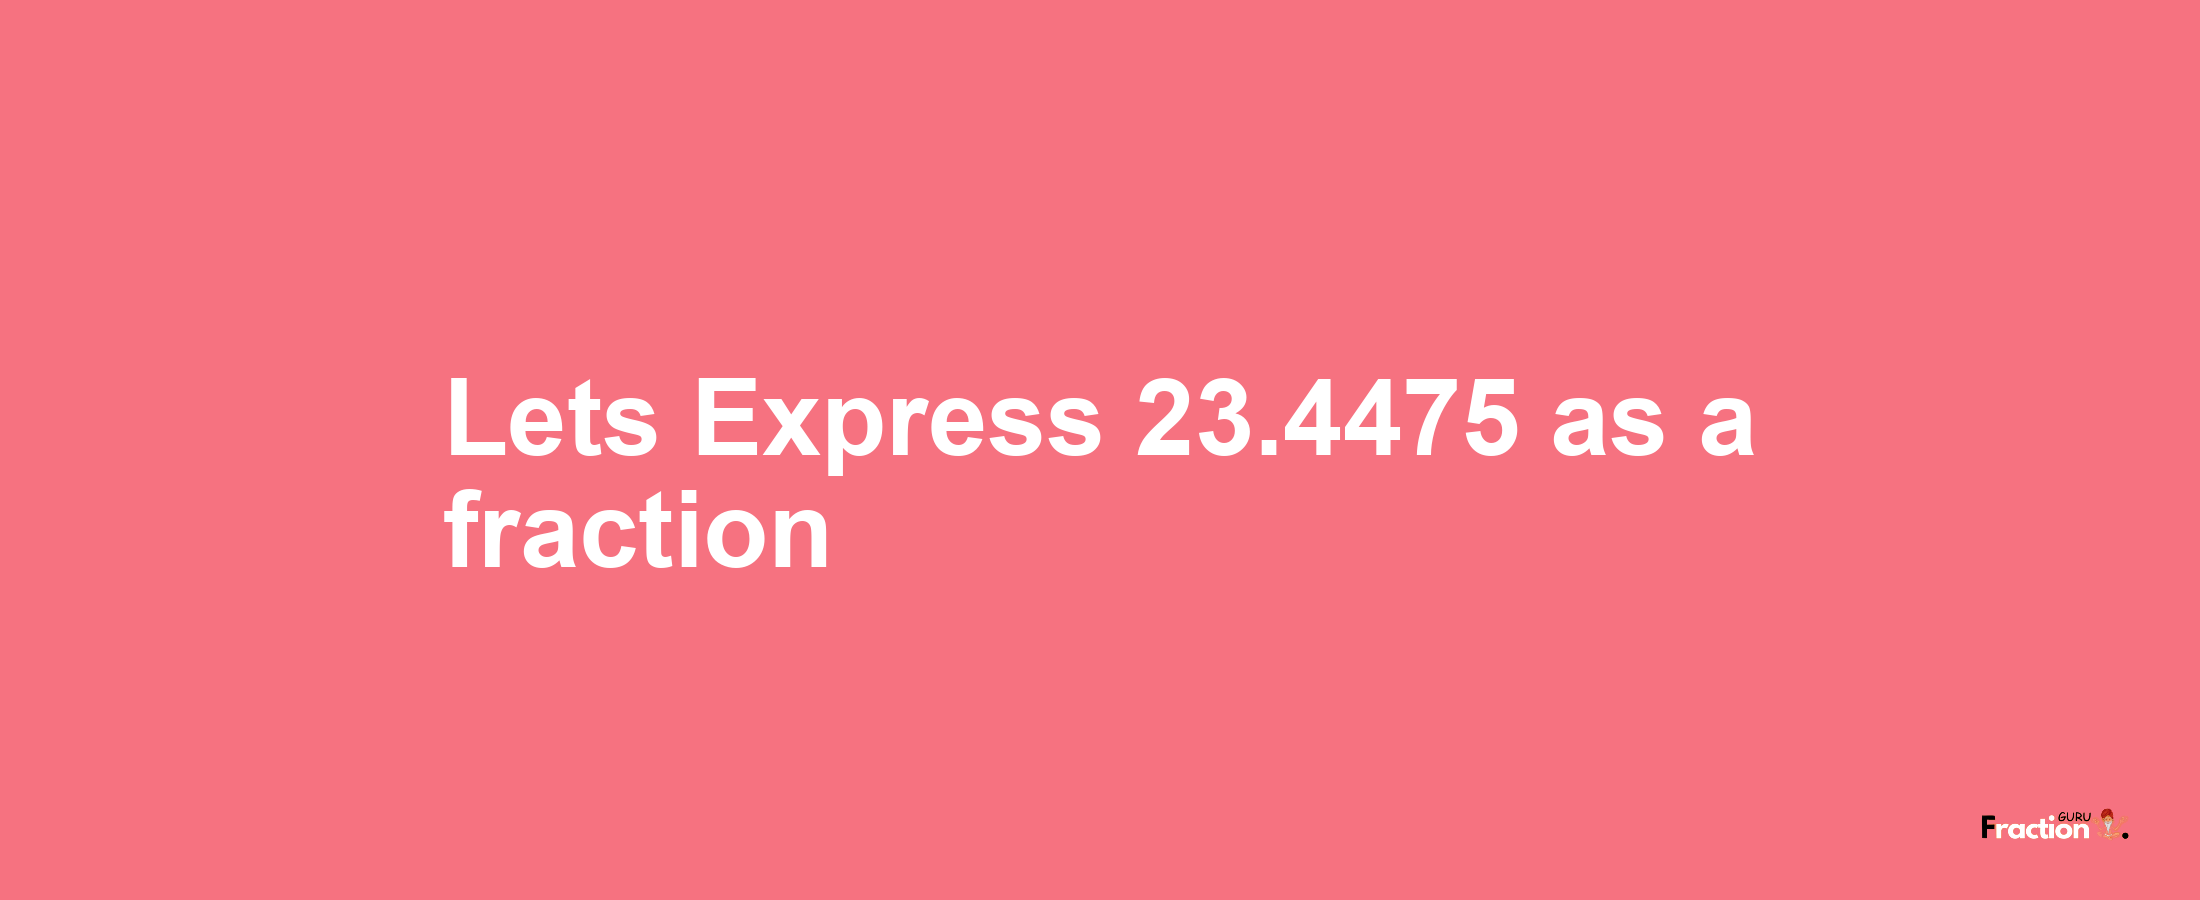 Lets Express 23.4475 as afraction